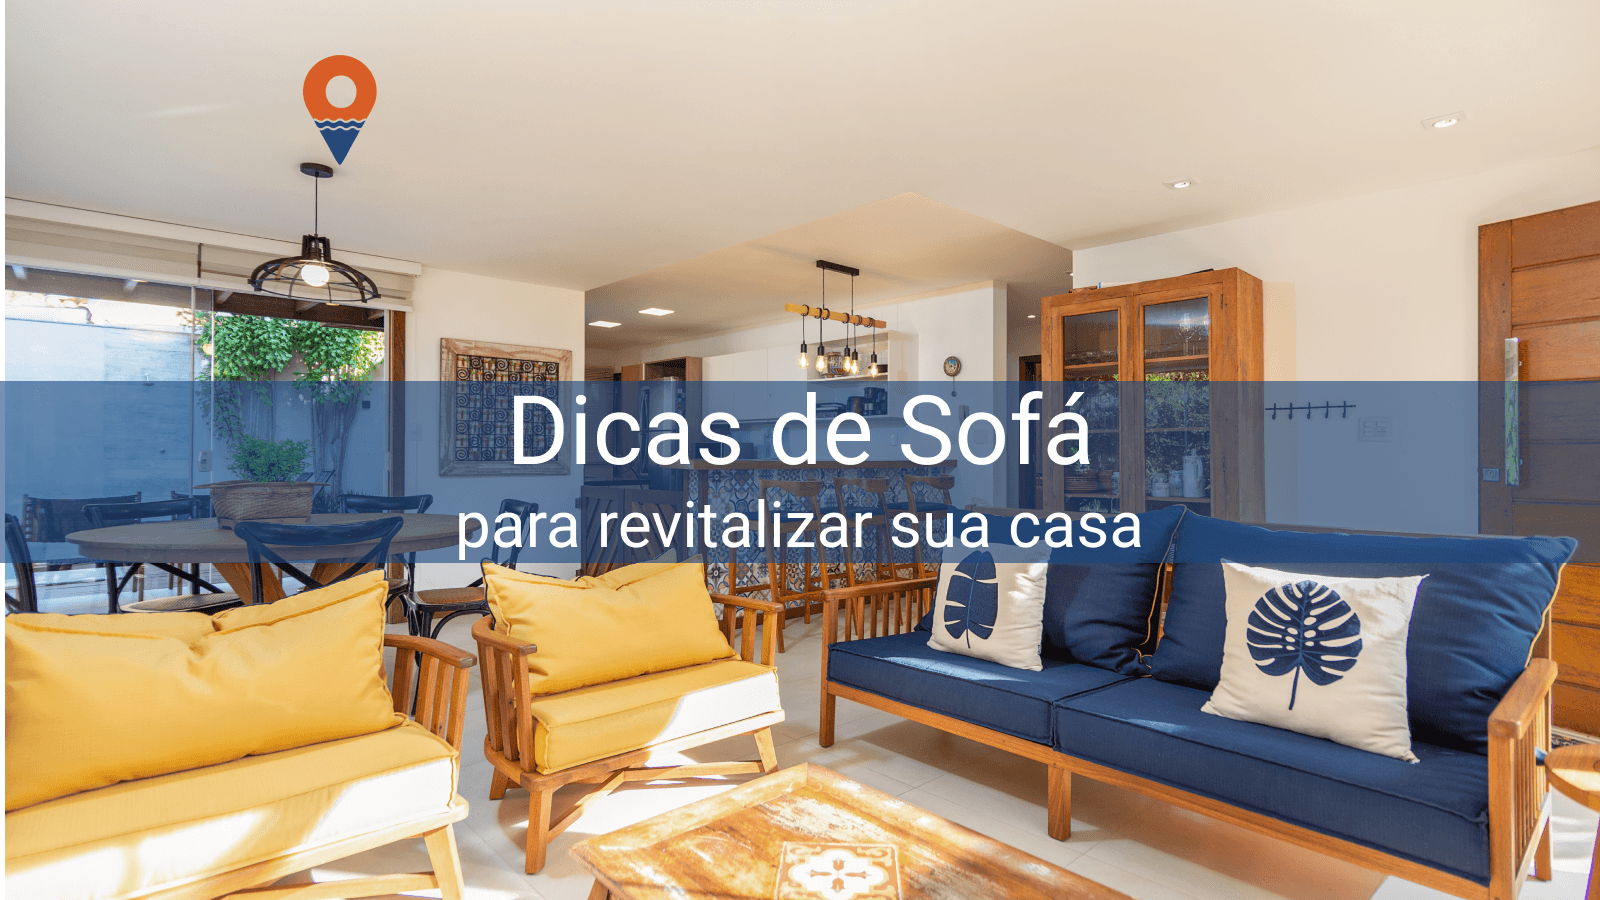 Tips de renovate your living room with sofas!